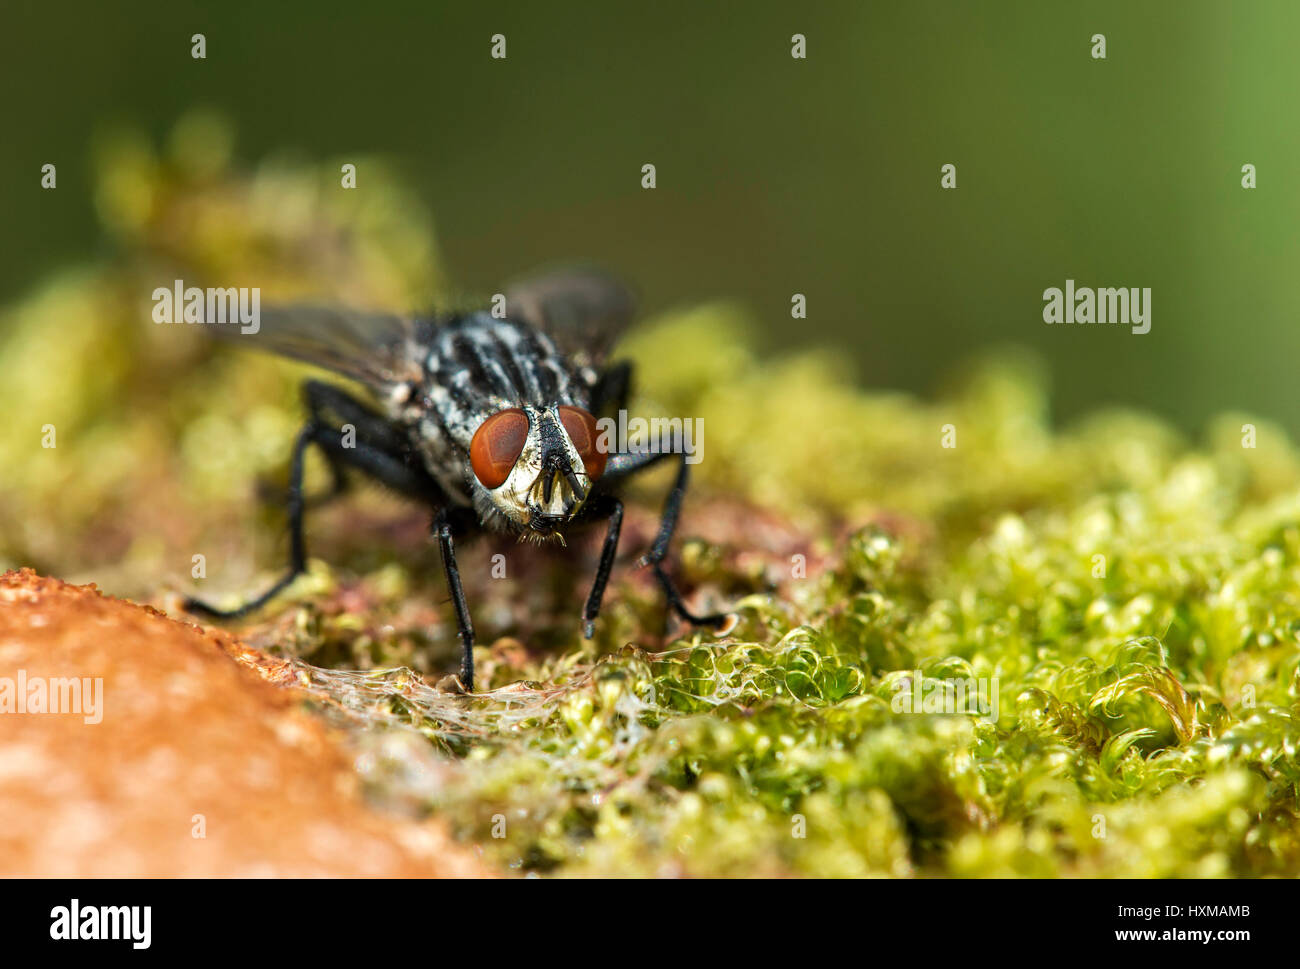 Blowfly (Calliphora vicina) on a slime mold, Switzerland Stock Photo